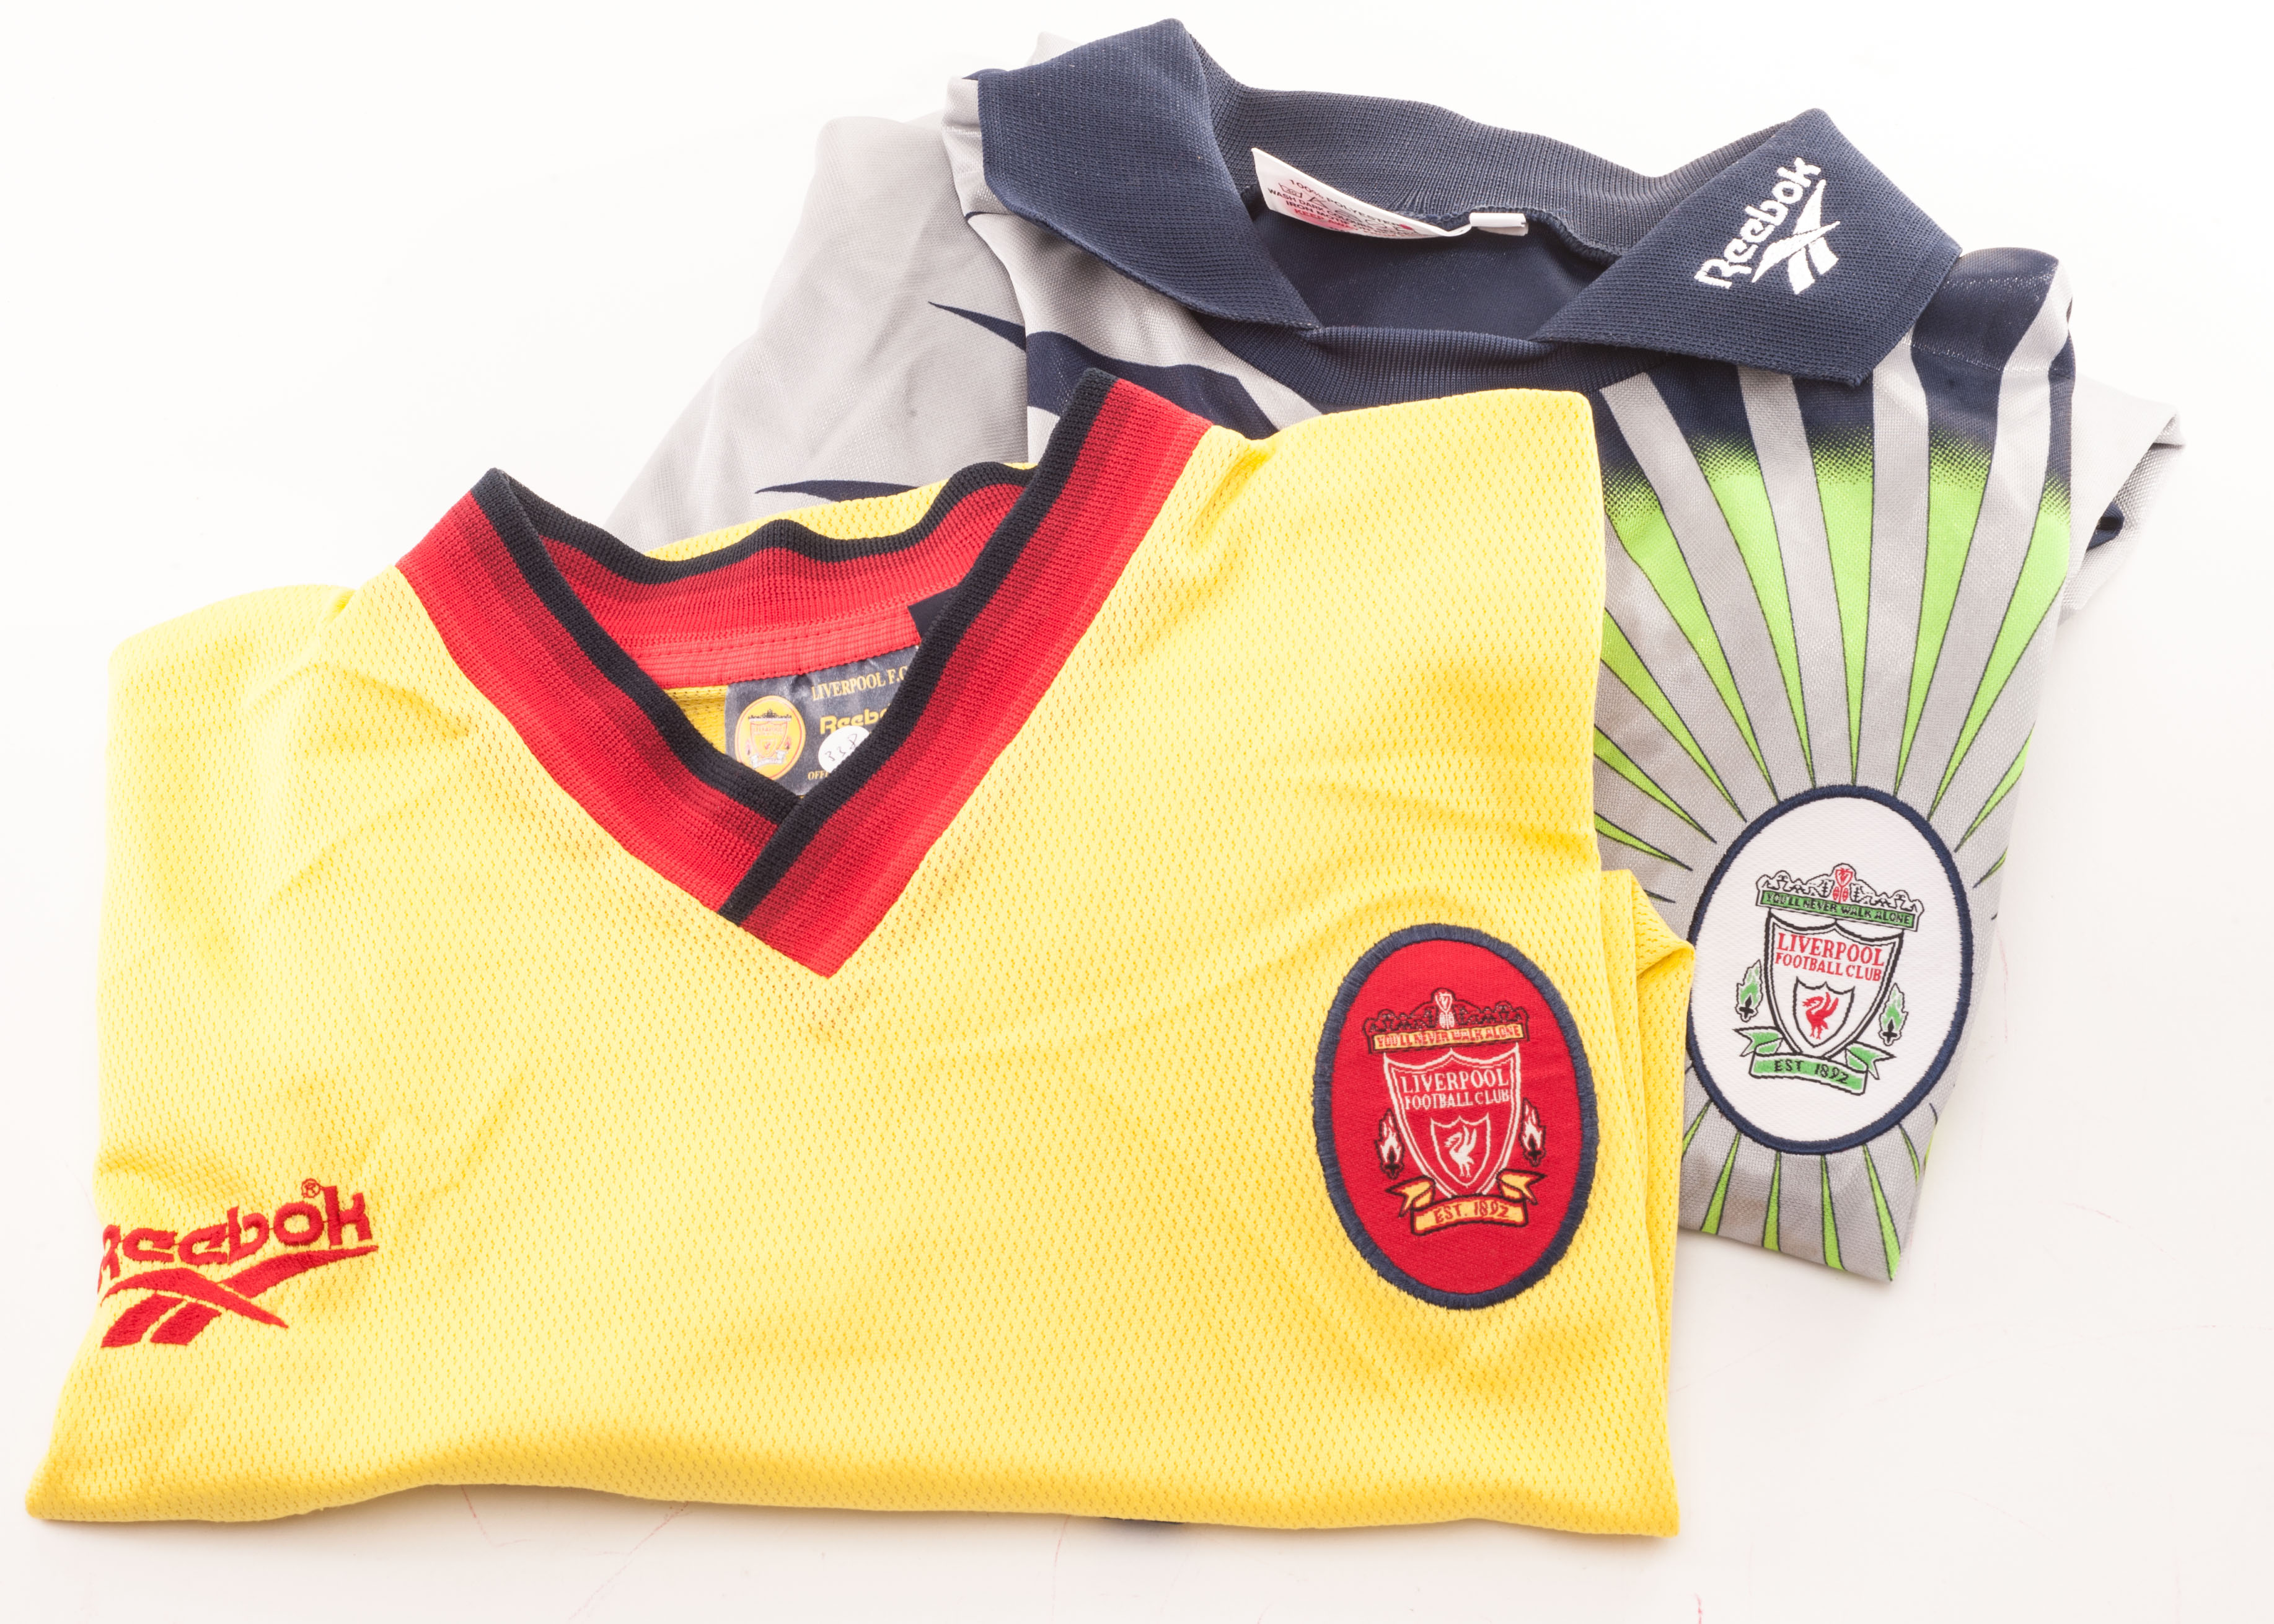 Football: Liverpool FC, a collection of 13 replica shirts, Liverpool FC jacket & two pairs of